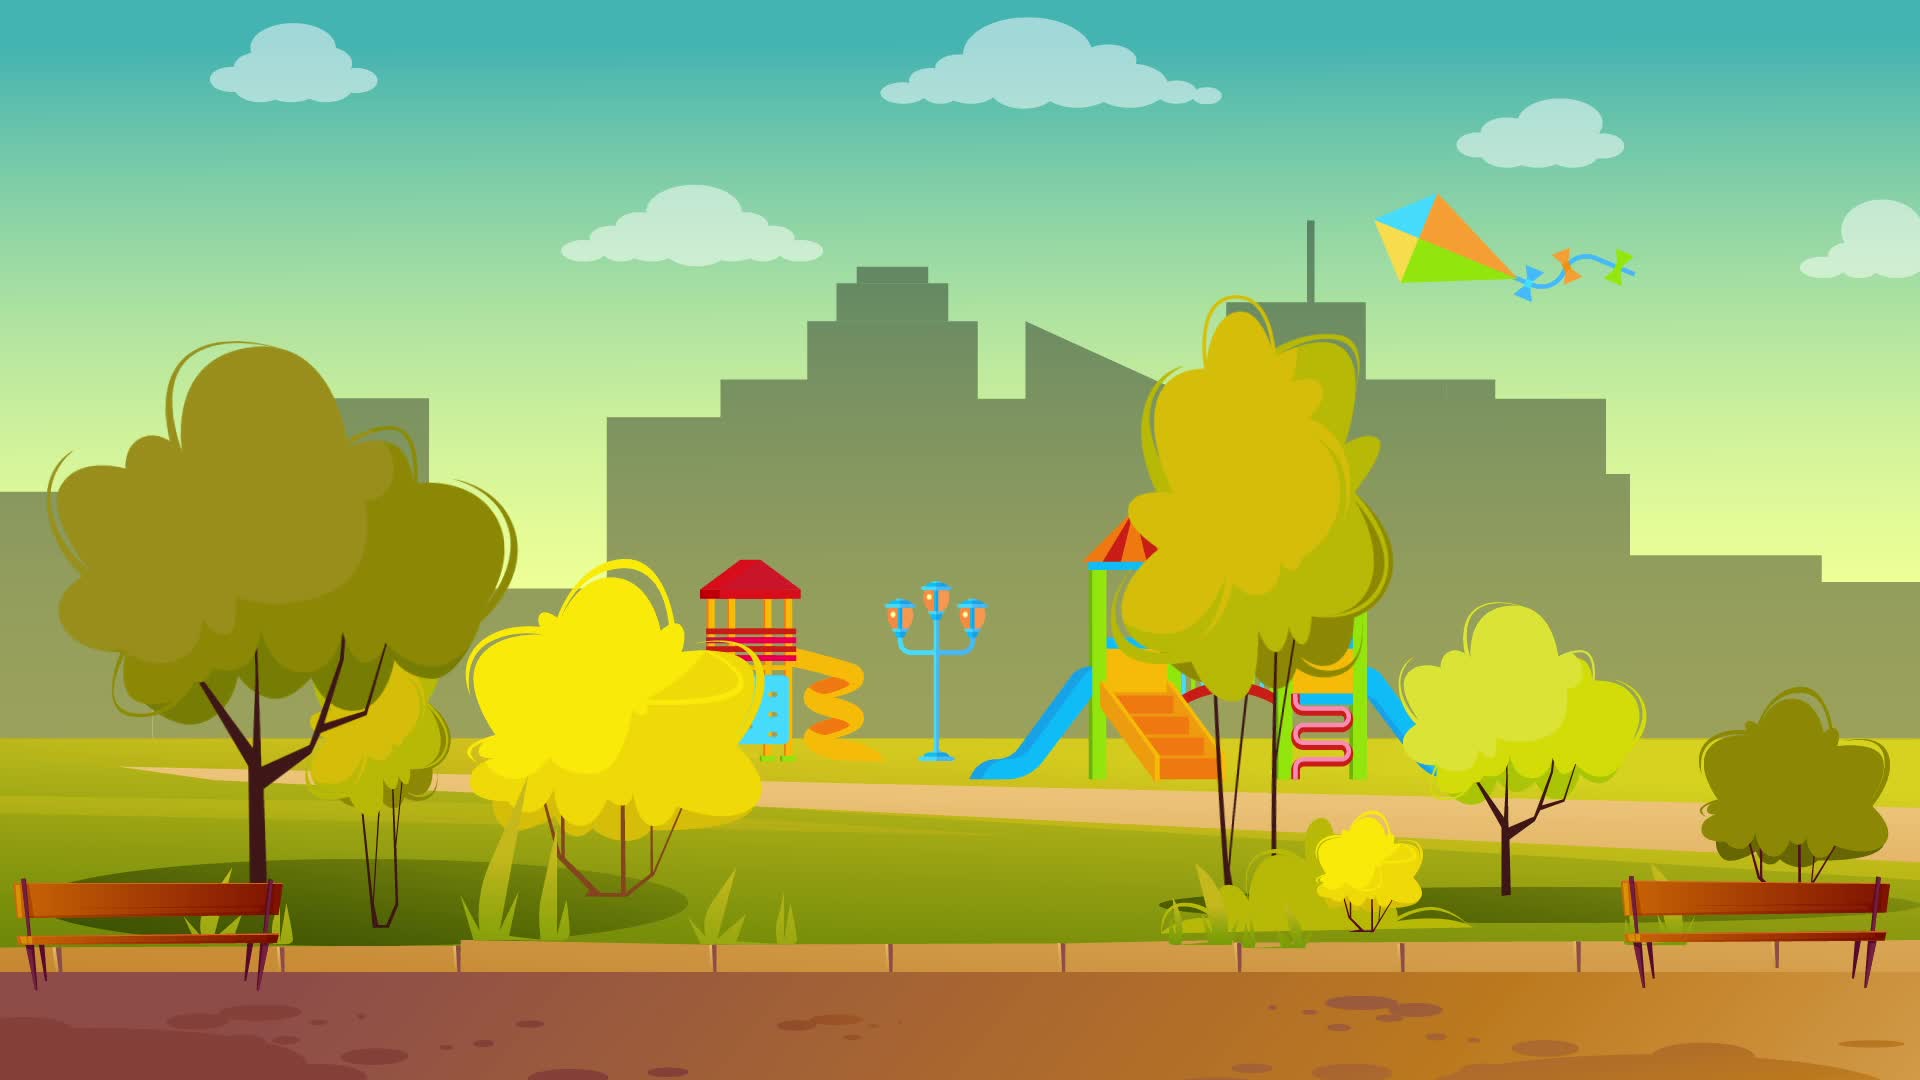 Park Cartoon Stock Video Footage for Free Download